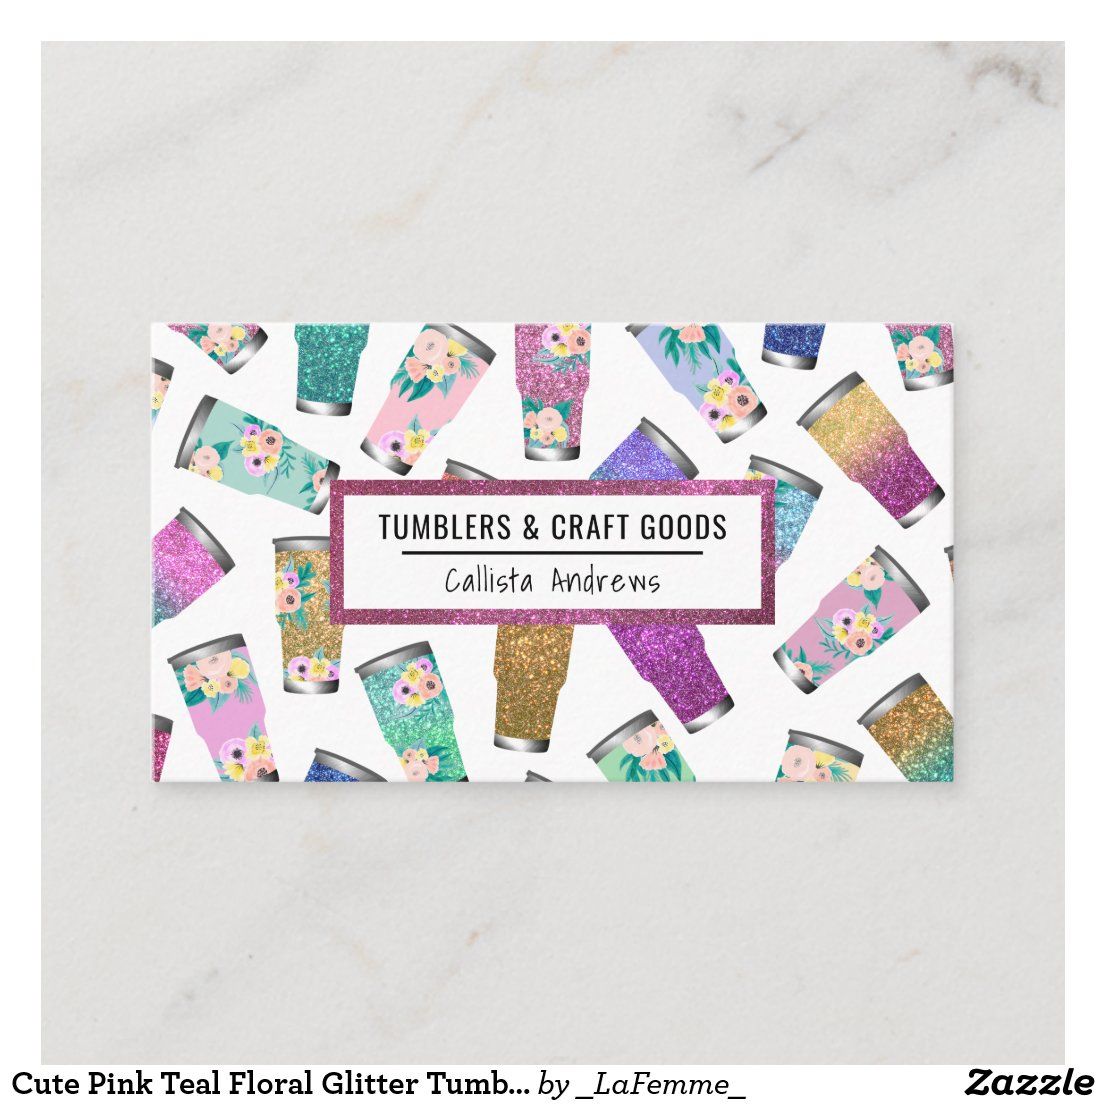 tumbler business cards 3